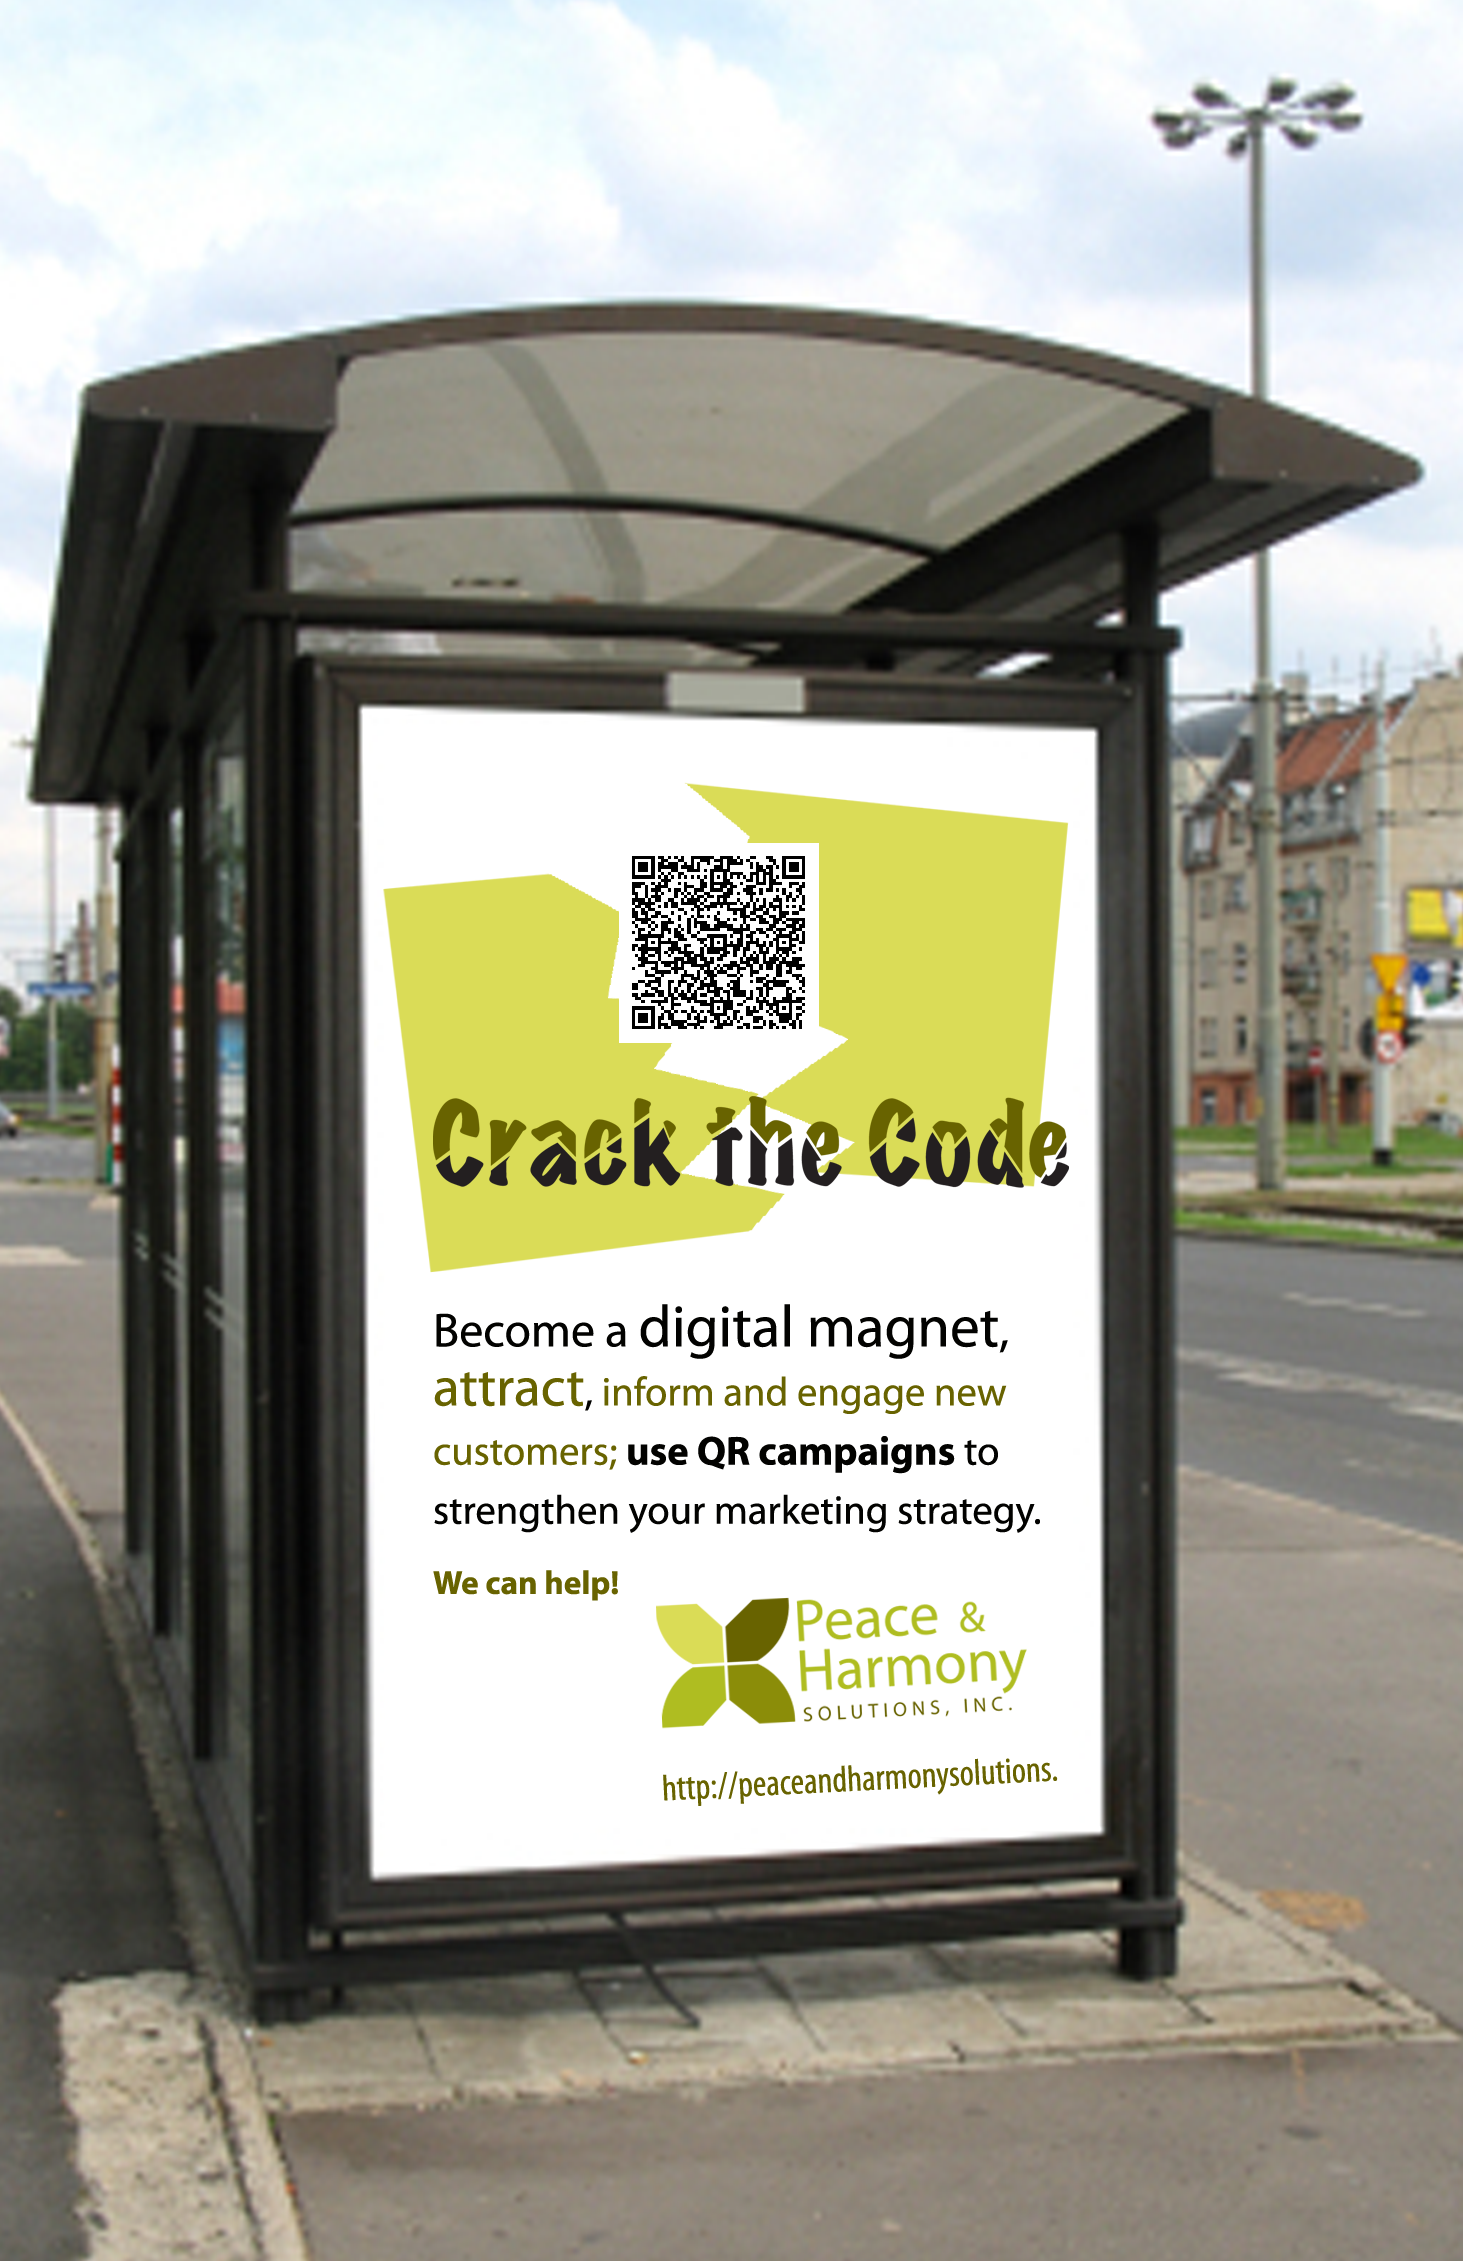 Crack the Code image - Peace & Harmony Solutions, Inc.